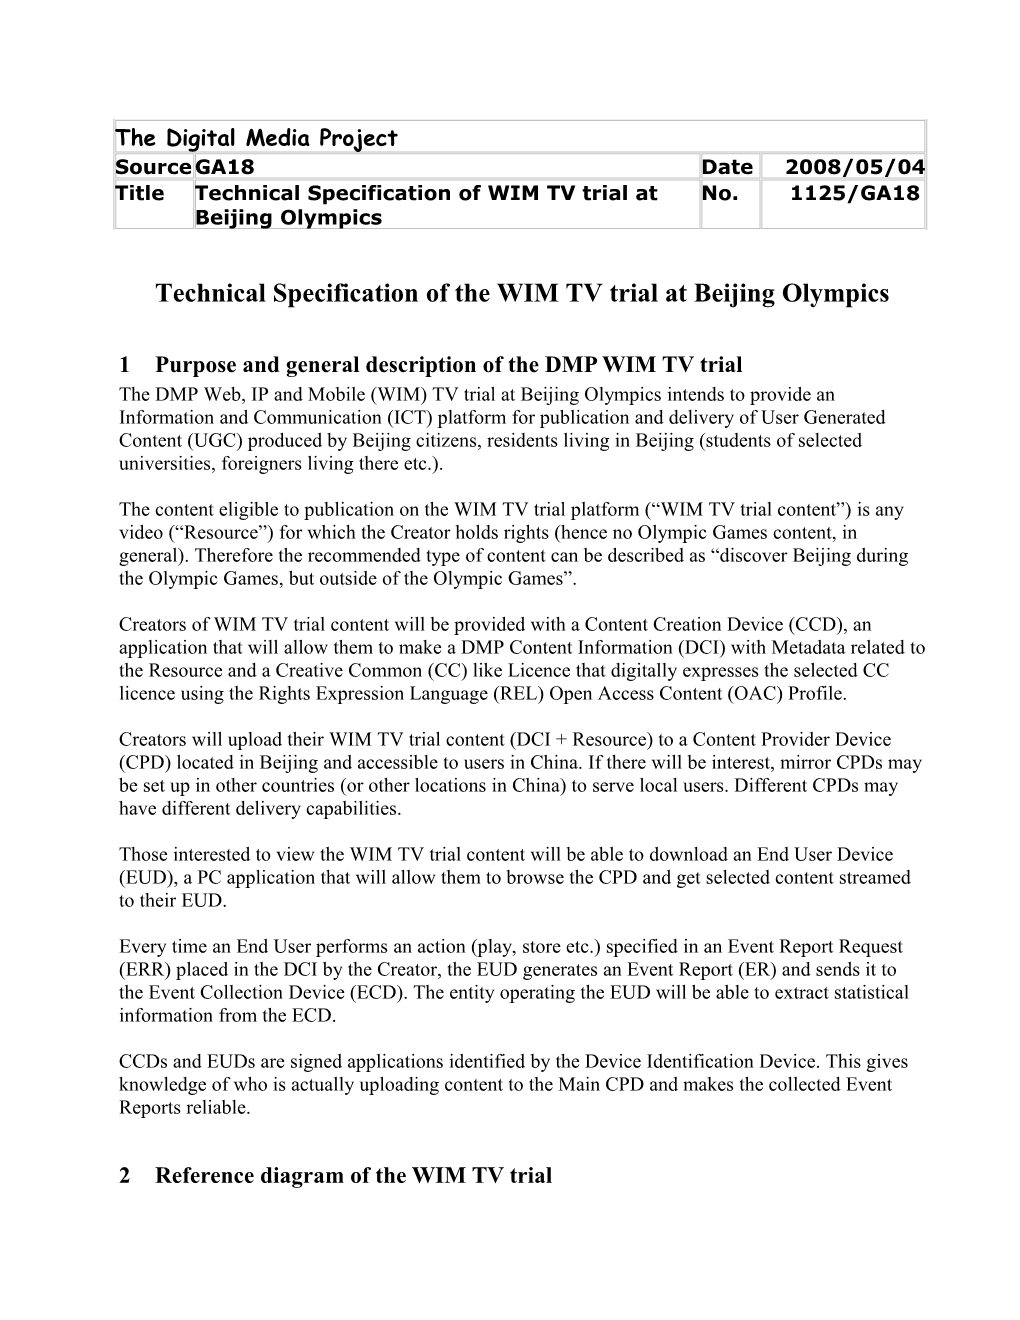 Technical Specification of the WIM TV Trial at Beijing Olympics